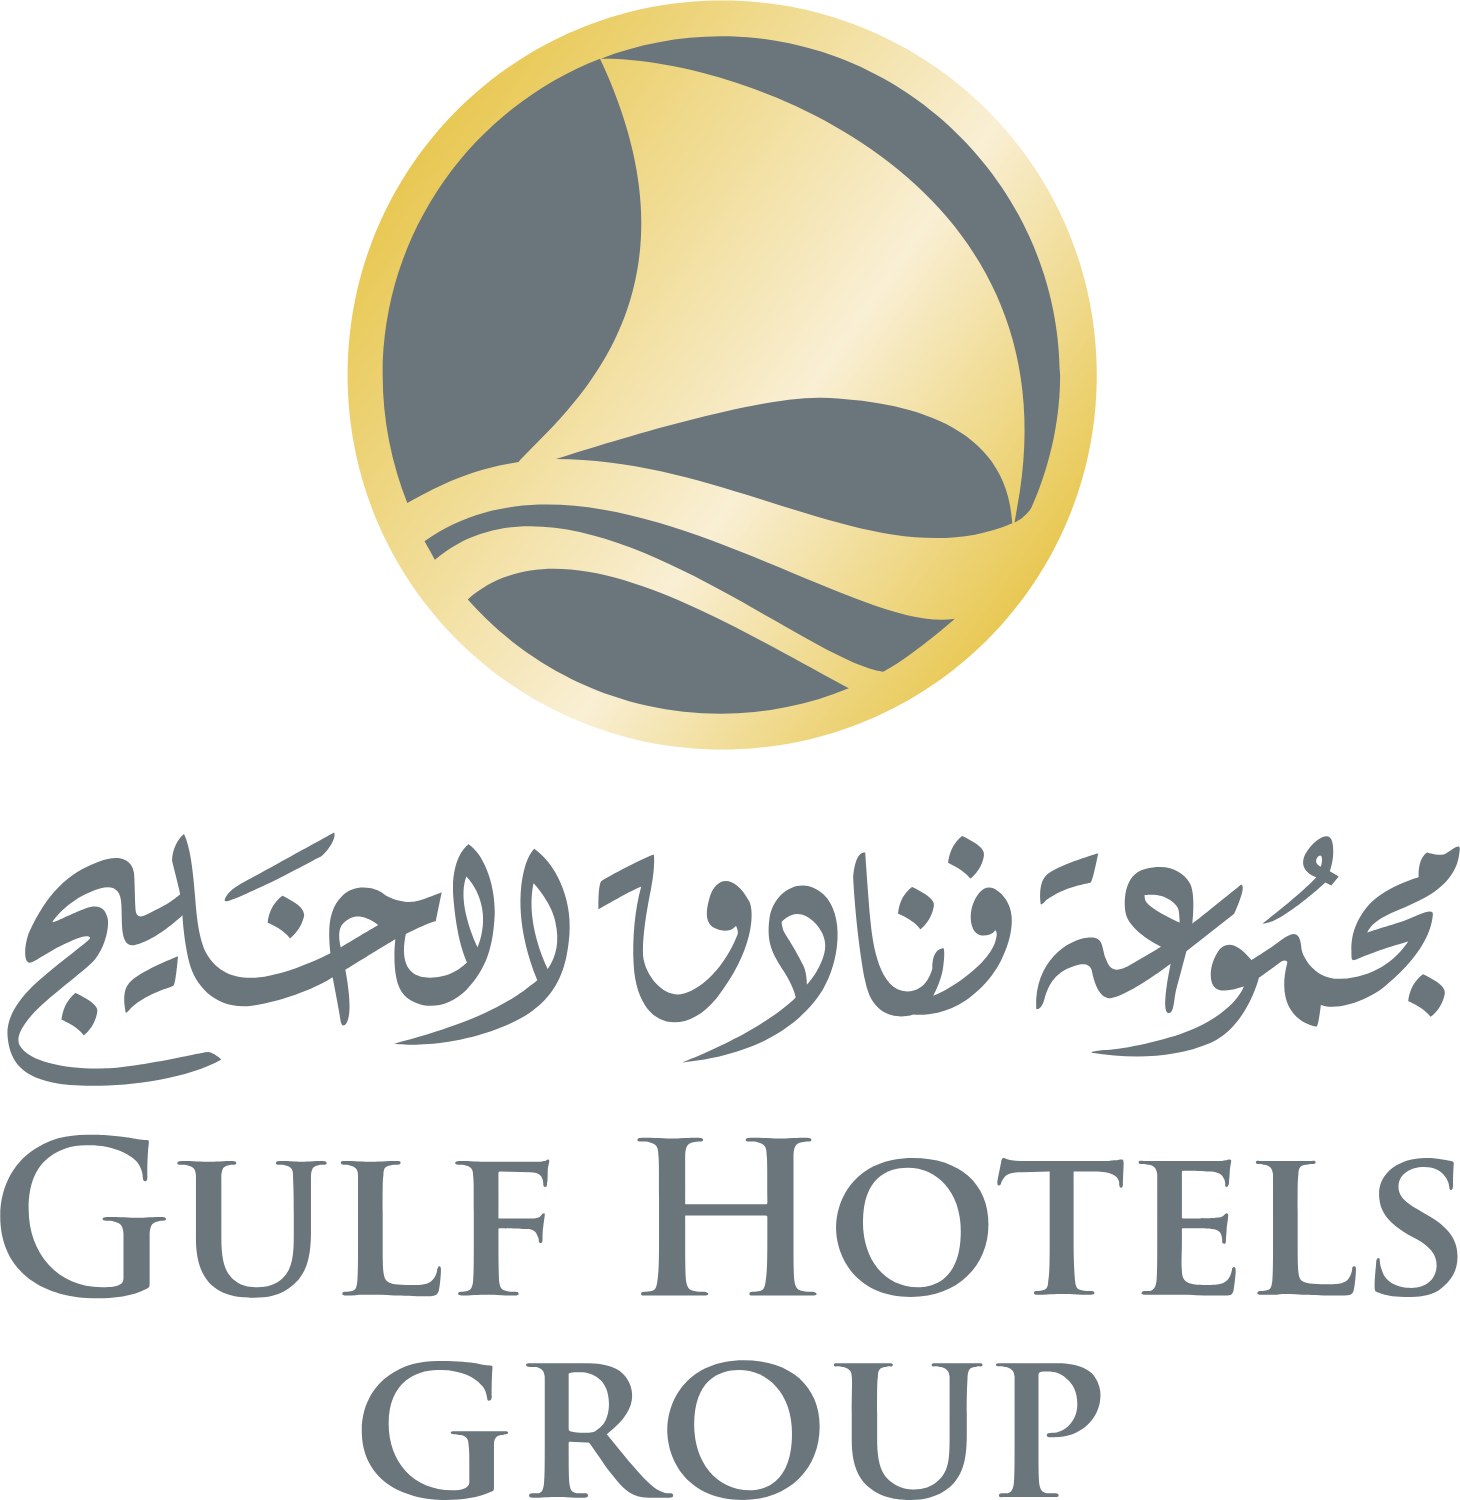 Gulf Hotels Group logo large (transparent PNG)